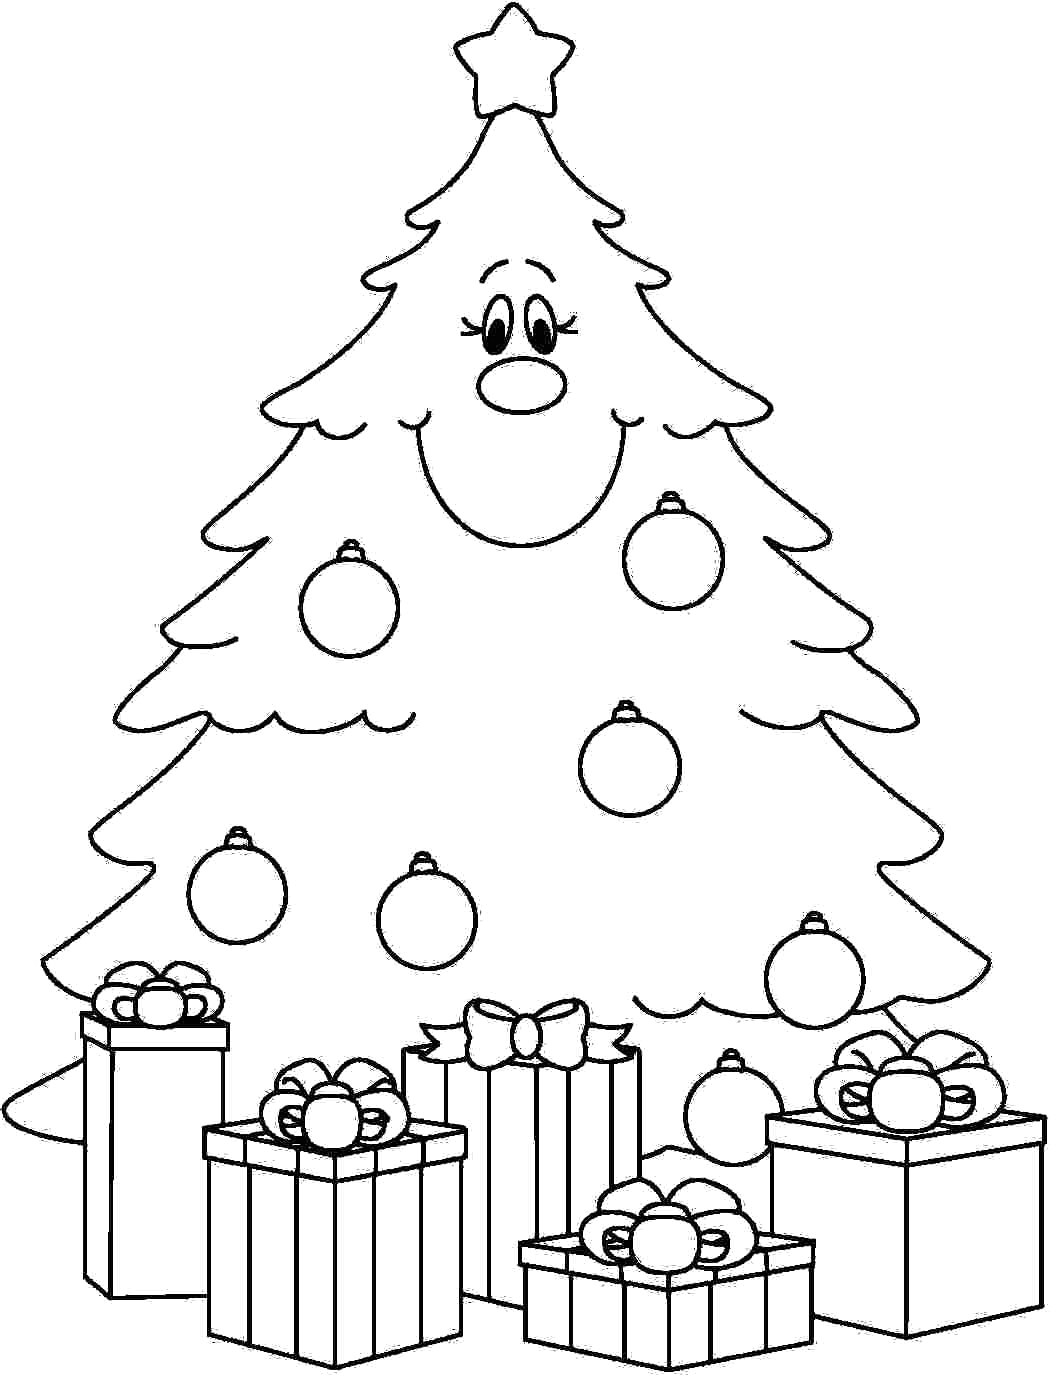 blank-christmas-tree-coloring-page-at-getcolorings-free-printable